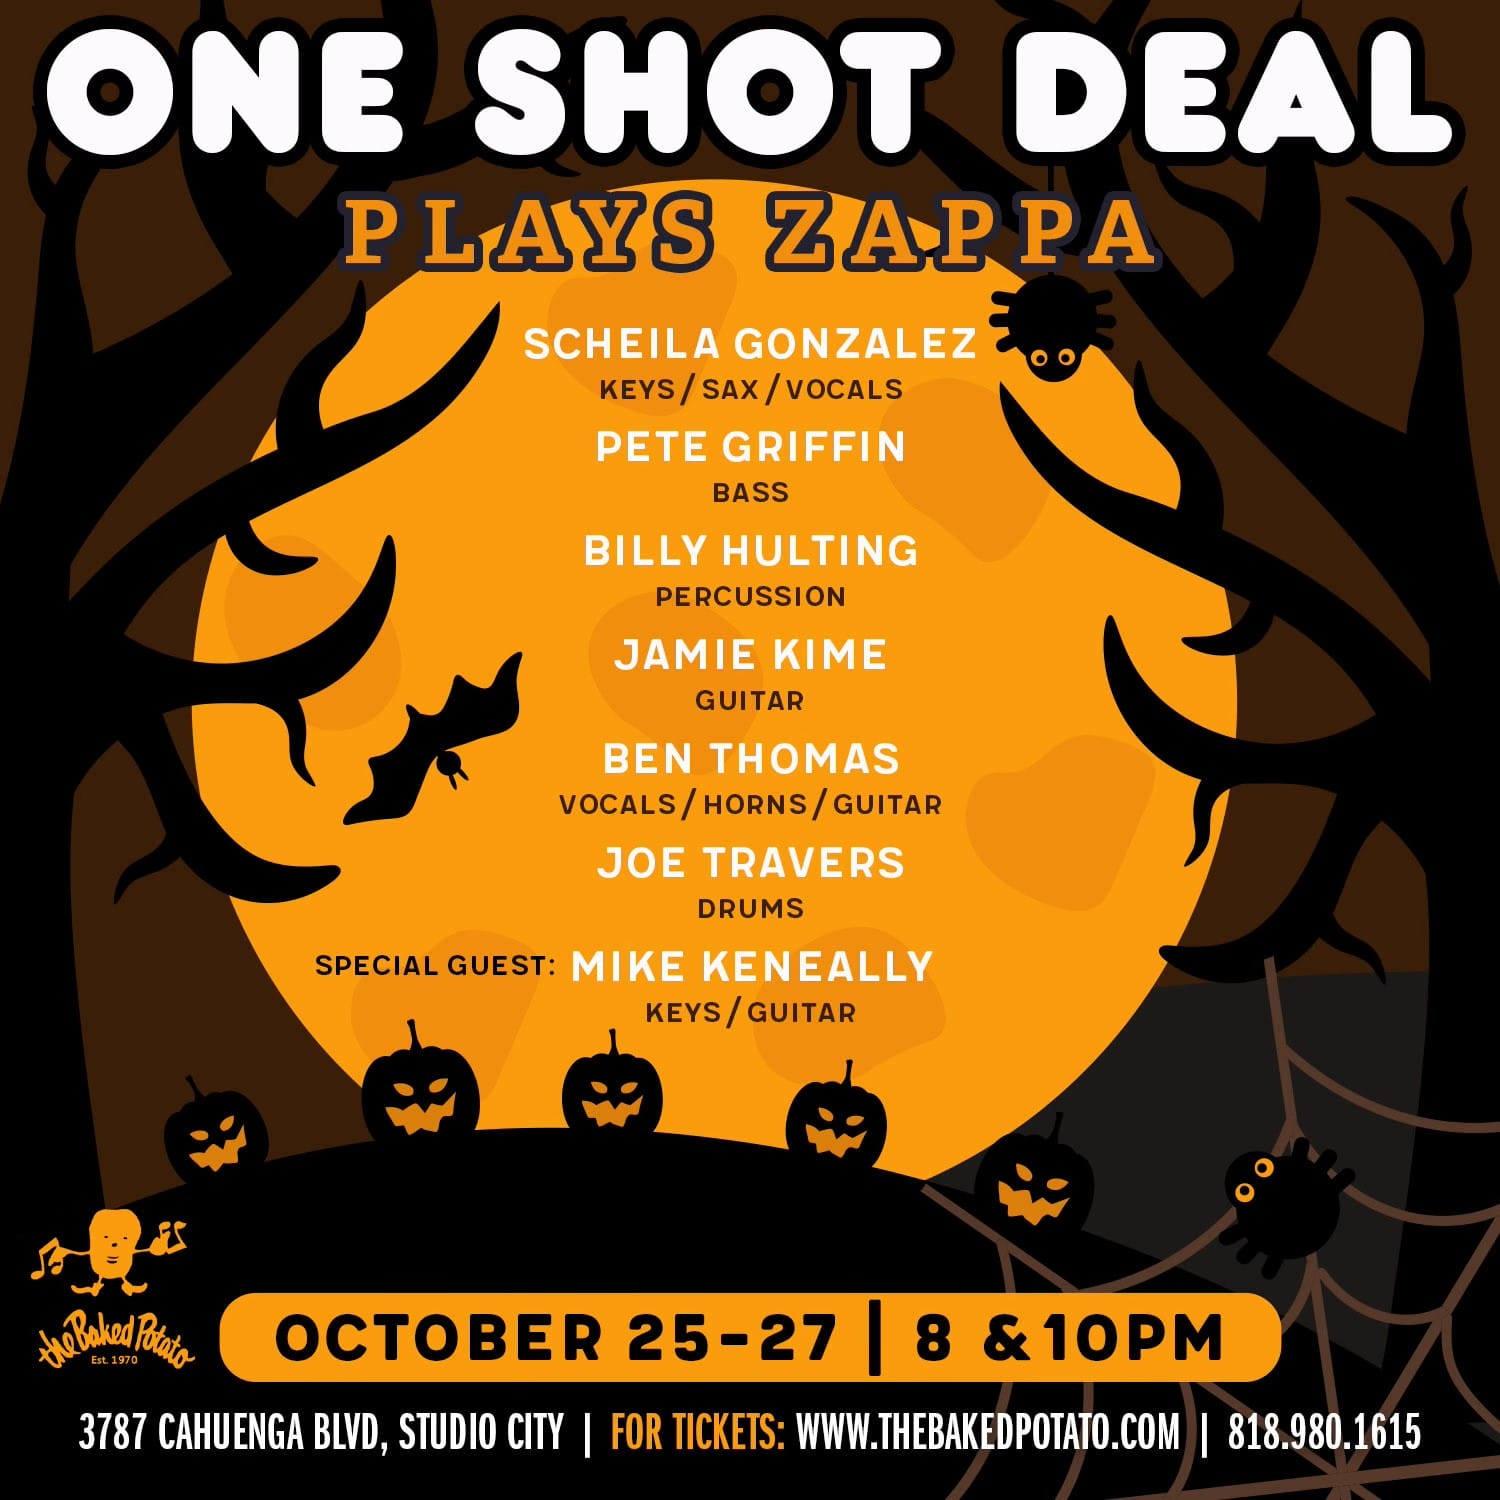 ONE SHOT DEAL Plays ZAPPA - Thursday, October 26, 2023